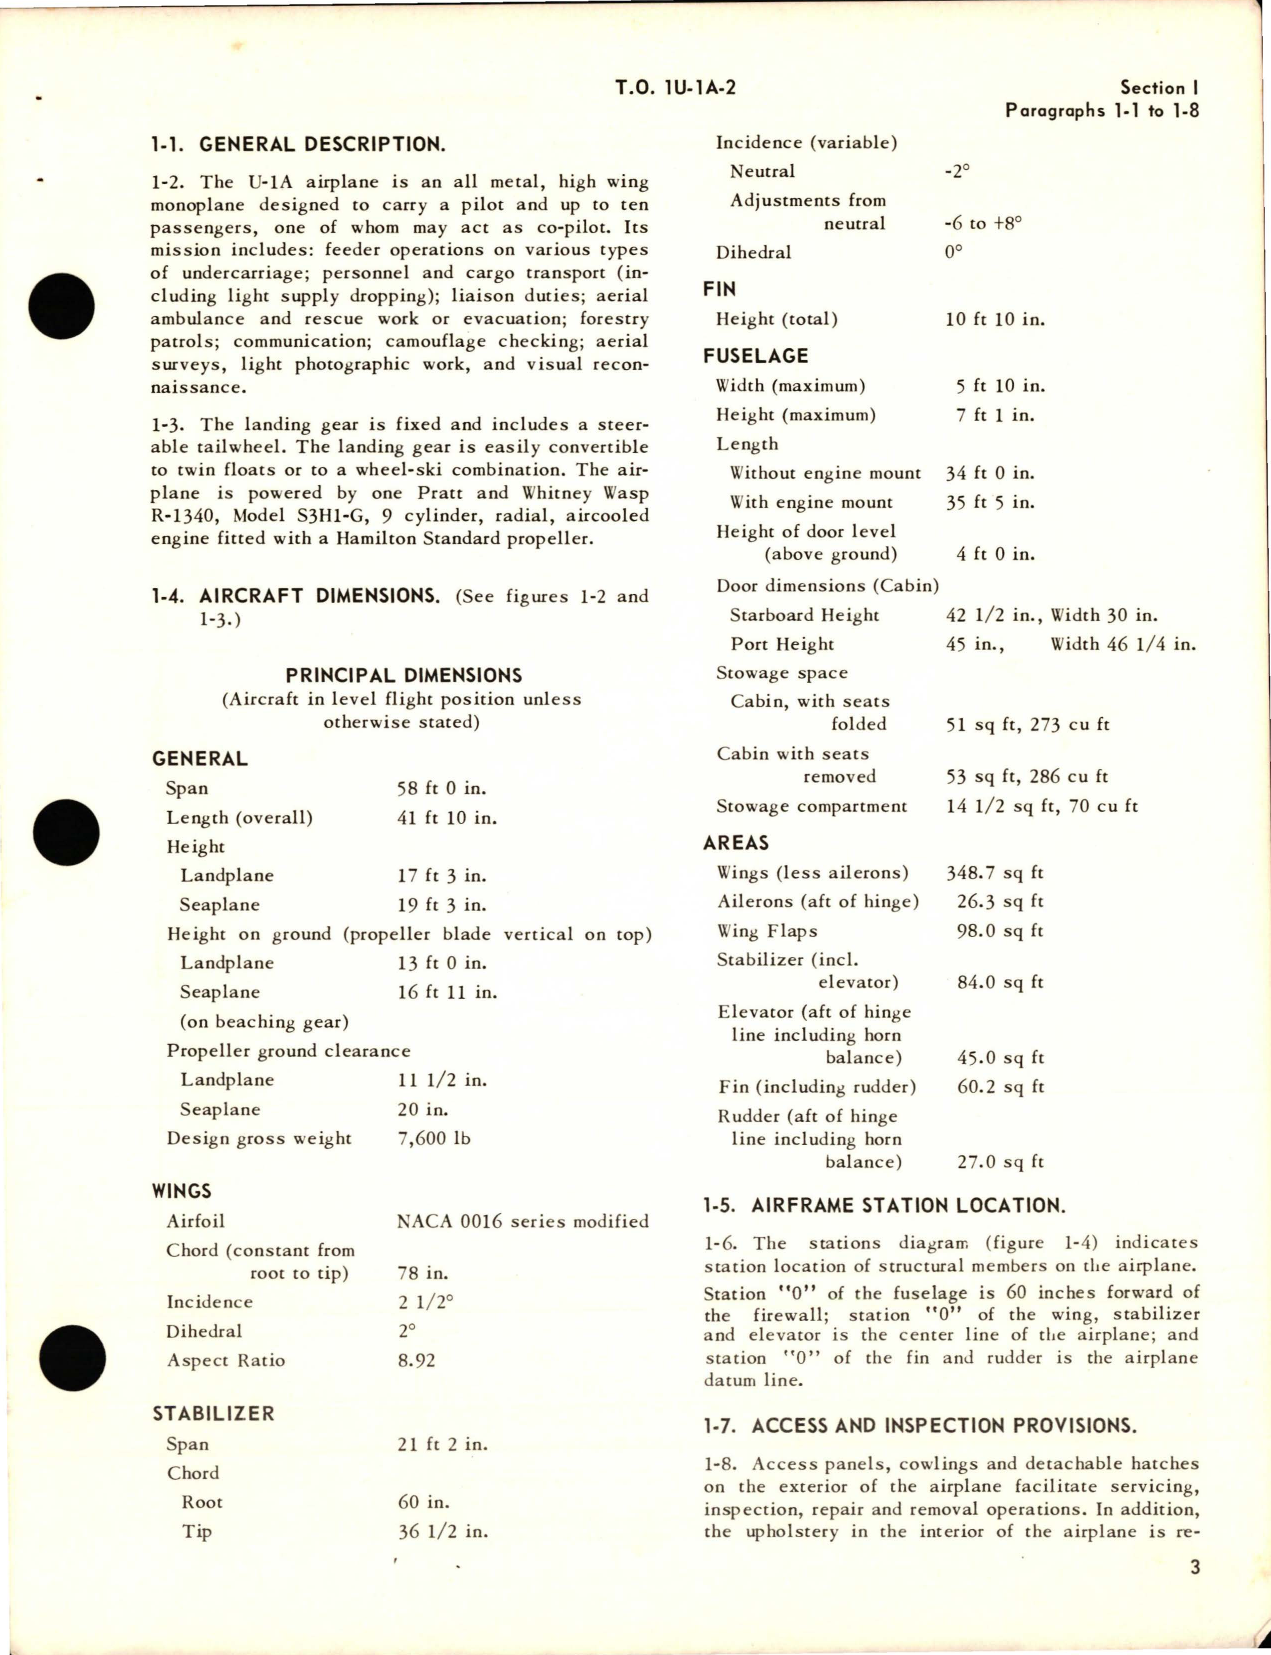 Sample page 9 from AirCorps Library document: Maintenance Instructions for YU-1 and U1A